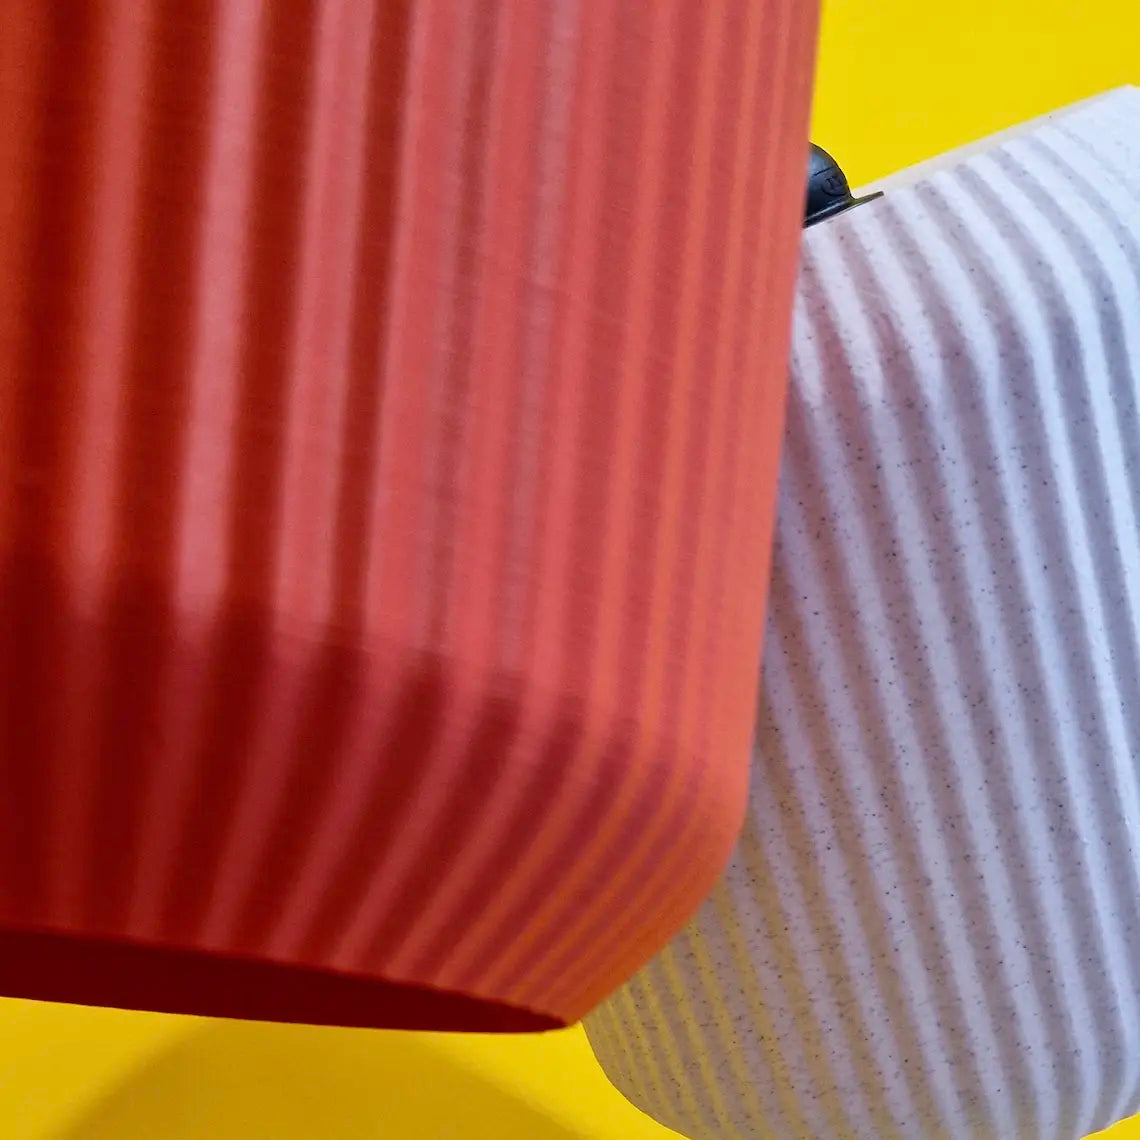 Close-up view of Lucash lampshade highlighting the eco-friendly PLA filament material and detailed texture.